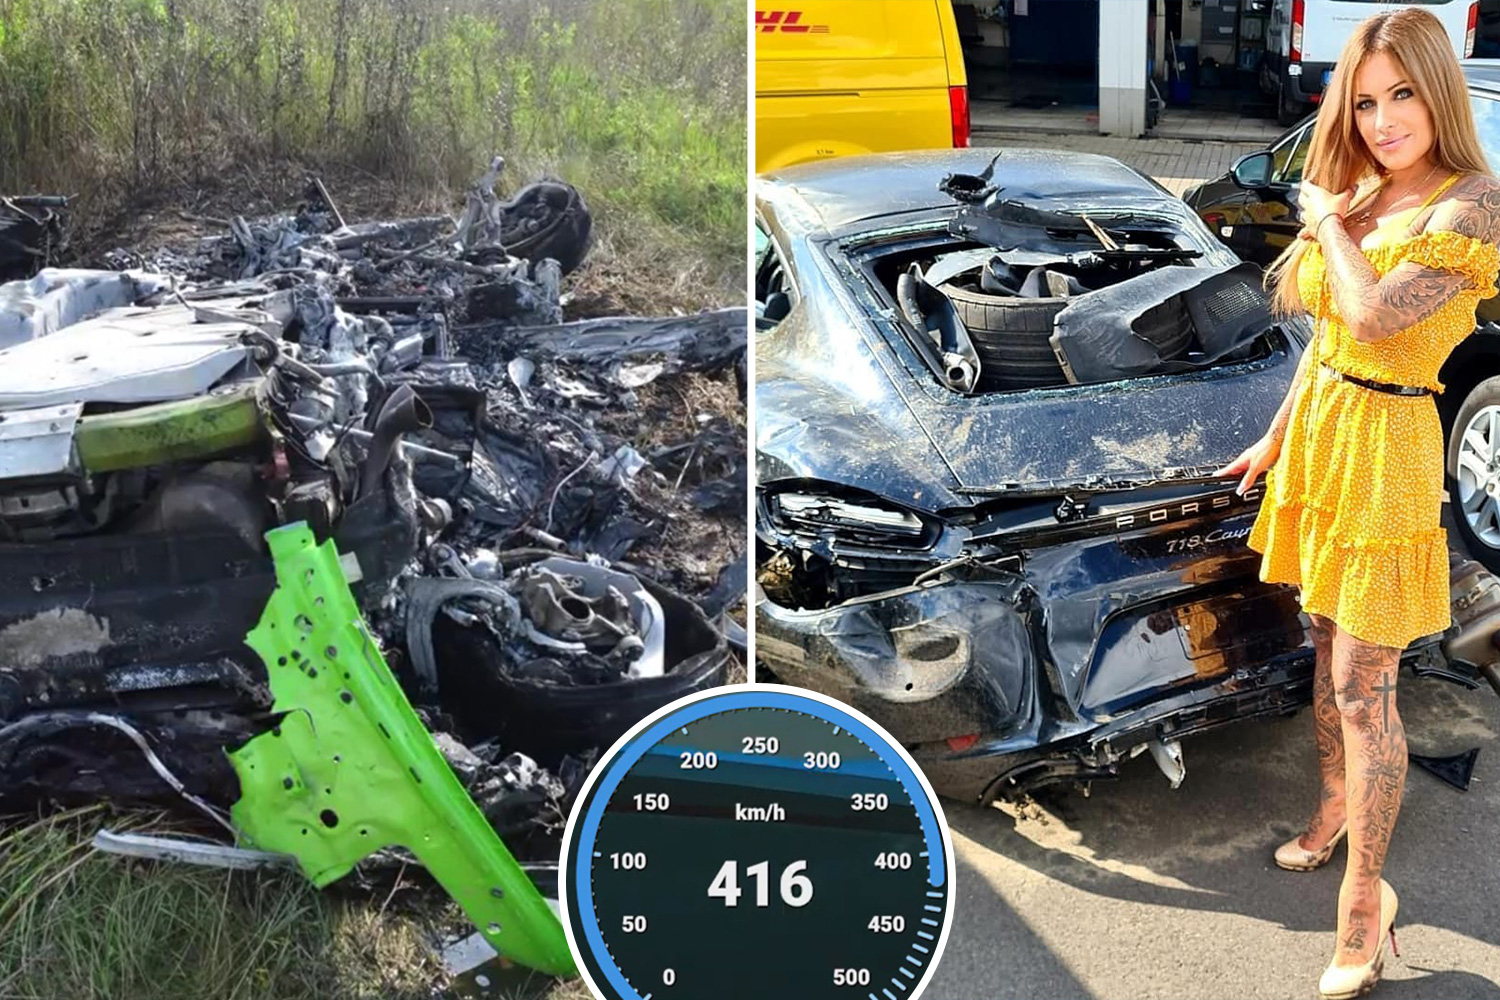 Inside deadly world of 'speed tourism' where drivers clock 260mph & total £200k supercars on German autobahns
